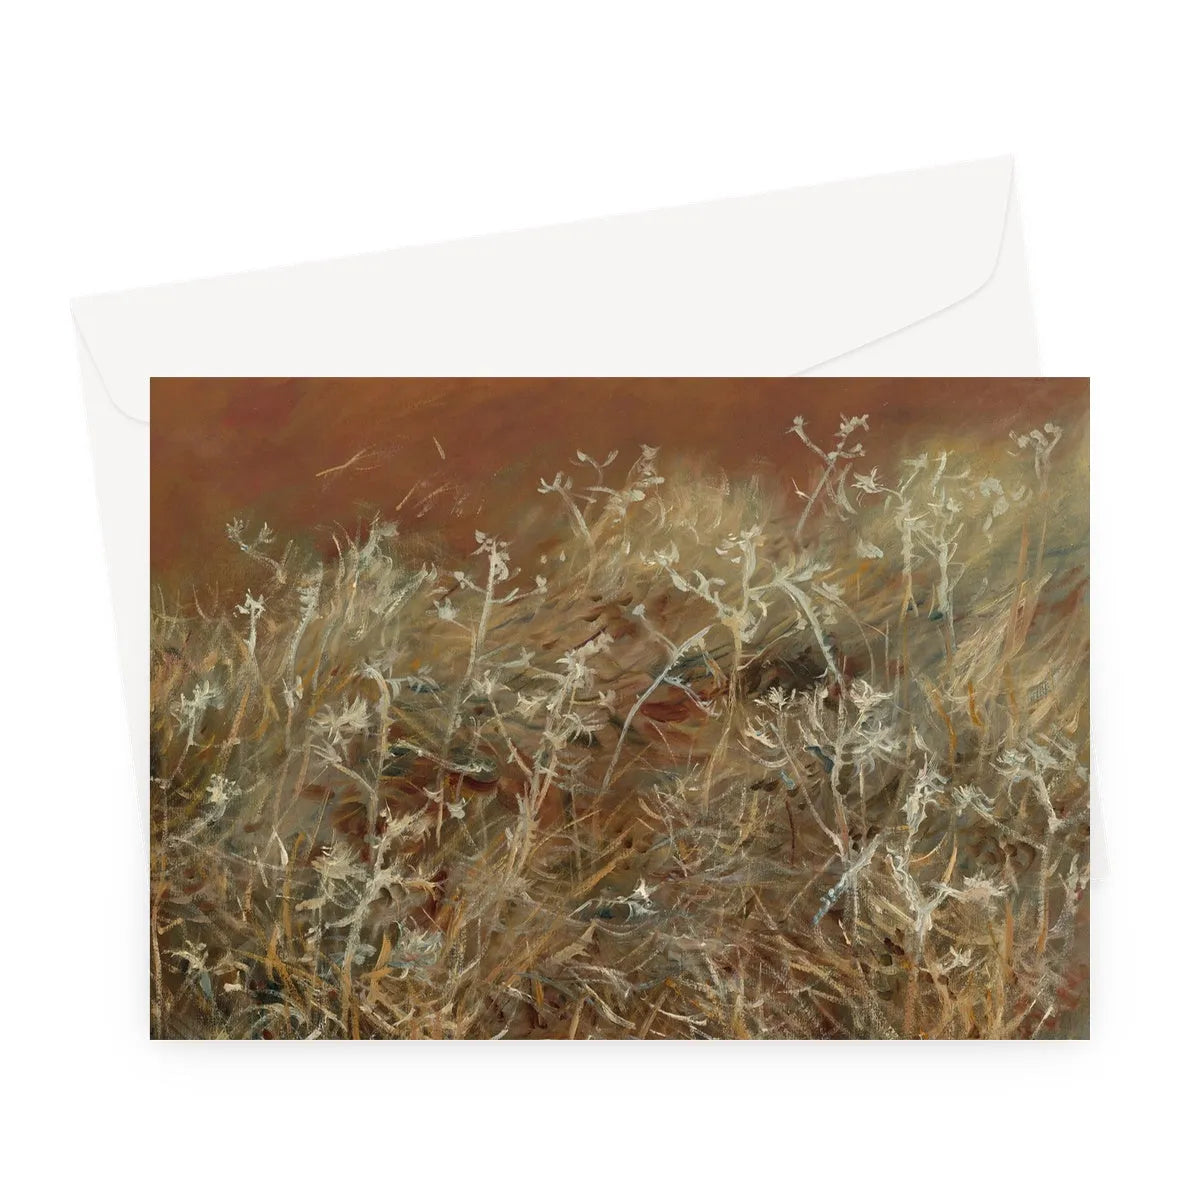 Thistles By John Singer Sargent Greeting Card - A5 Landscape / 1 Card - Greeting & Note Cards - Aesthetic Art